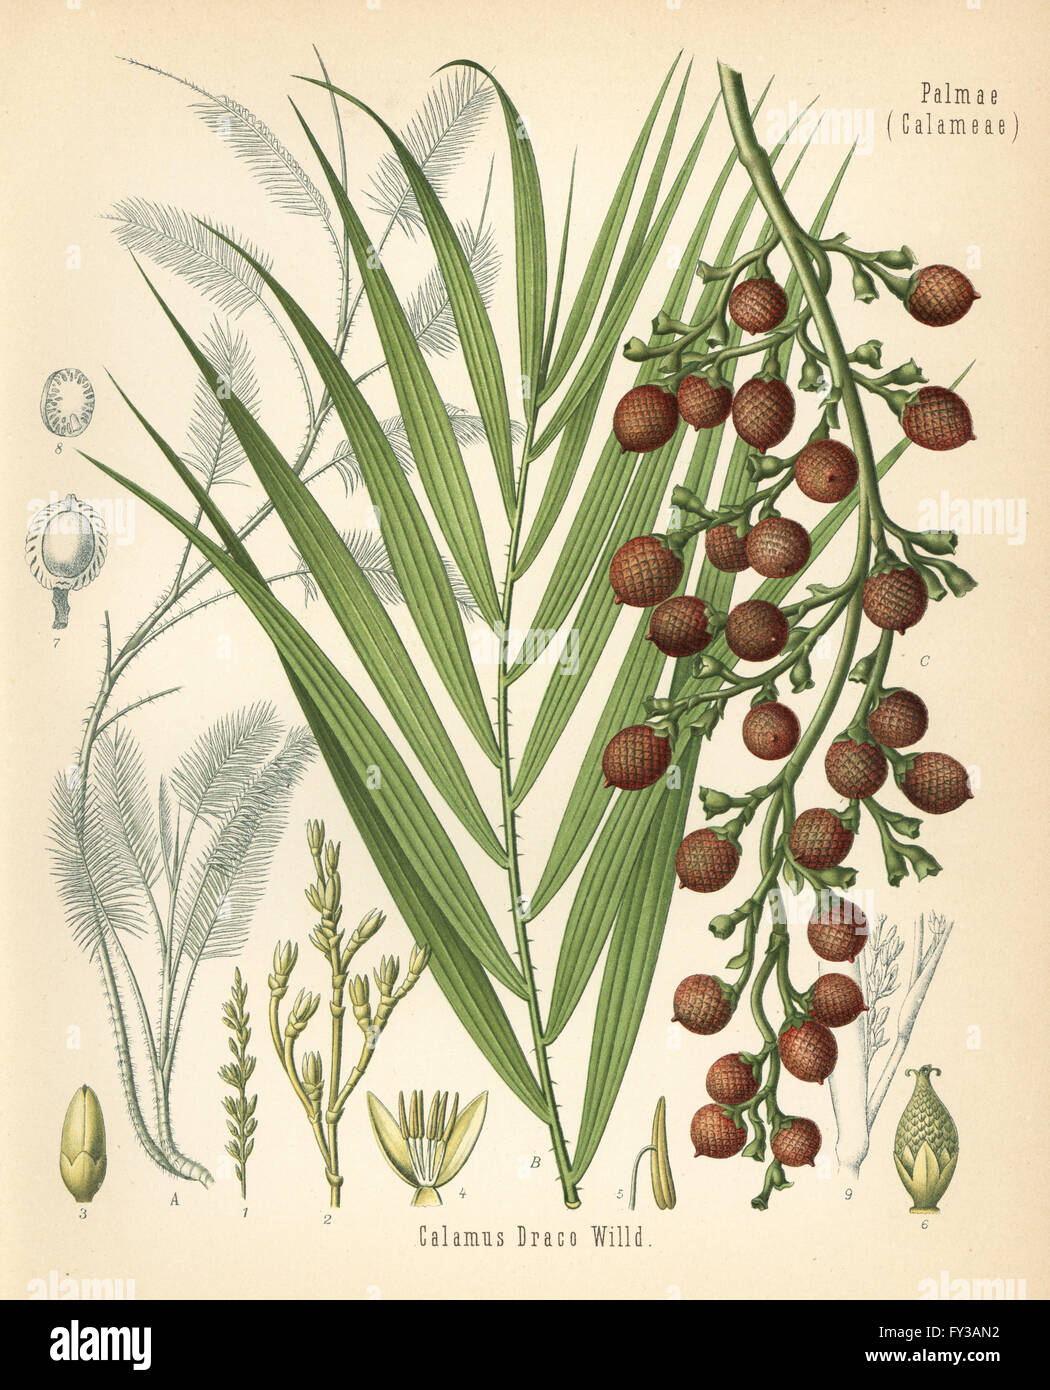 Dragon's blood, rattan or rotang, Daemonorops draco (Calamus draco). Chromolithograph after a botanical illustration from Hermann Adolph Koehler's Medicinal Plants, edited by Gustav Pabst, Koehler, Germany, 1887. Stock Photo